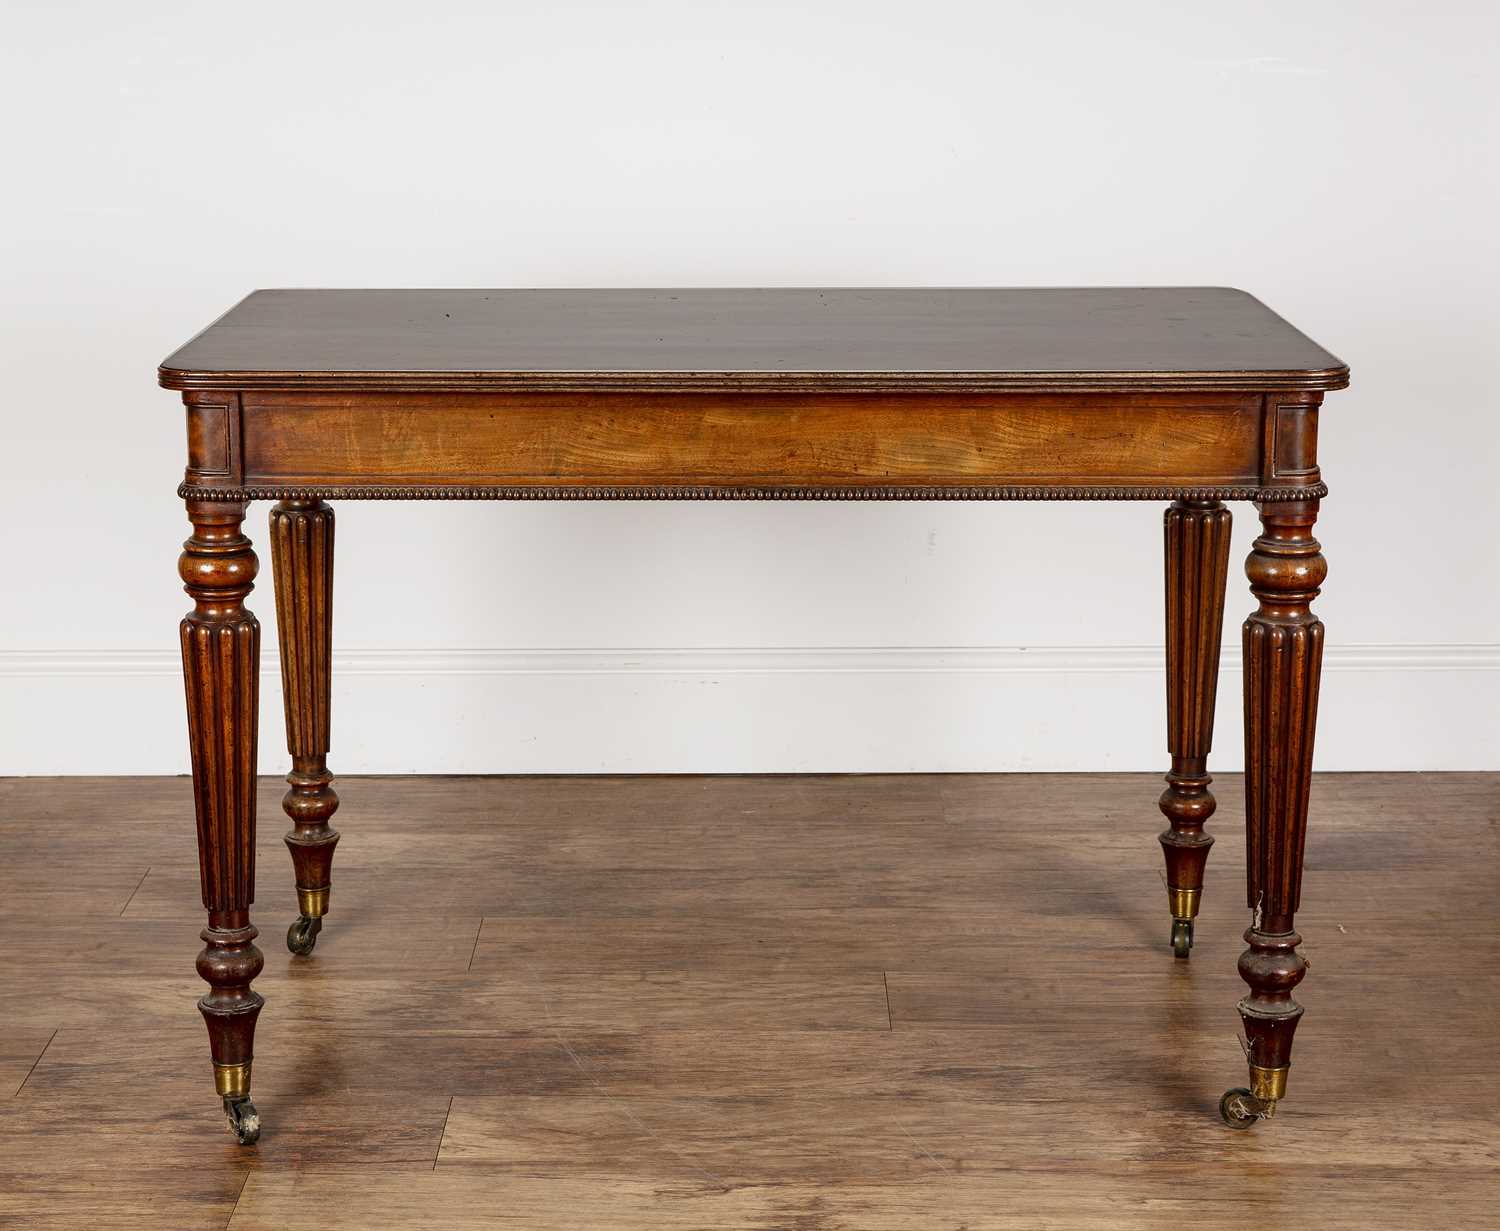 Gillows style mahogany desk or table 19th Century, with large double-sided single drawer, with - Image 2 of 5